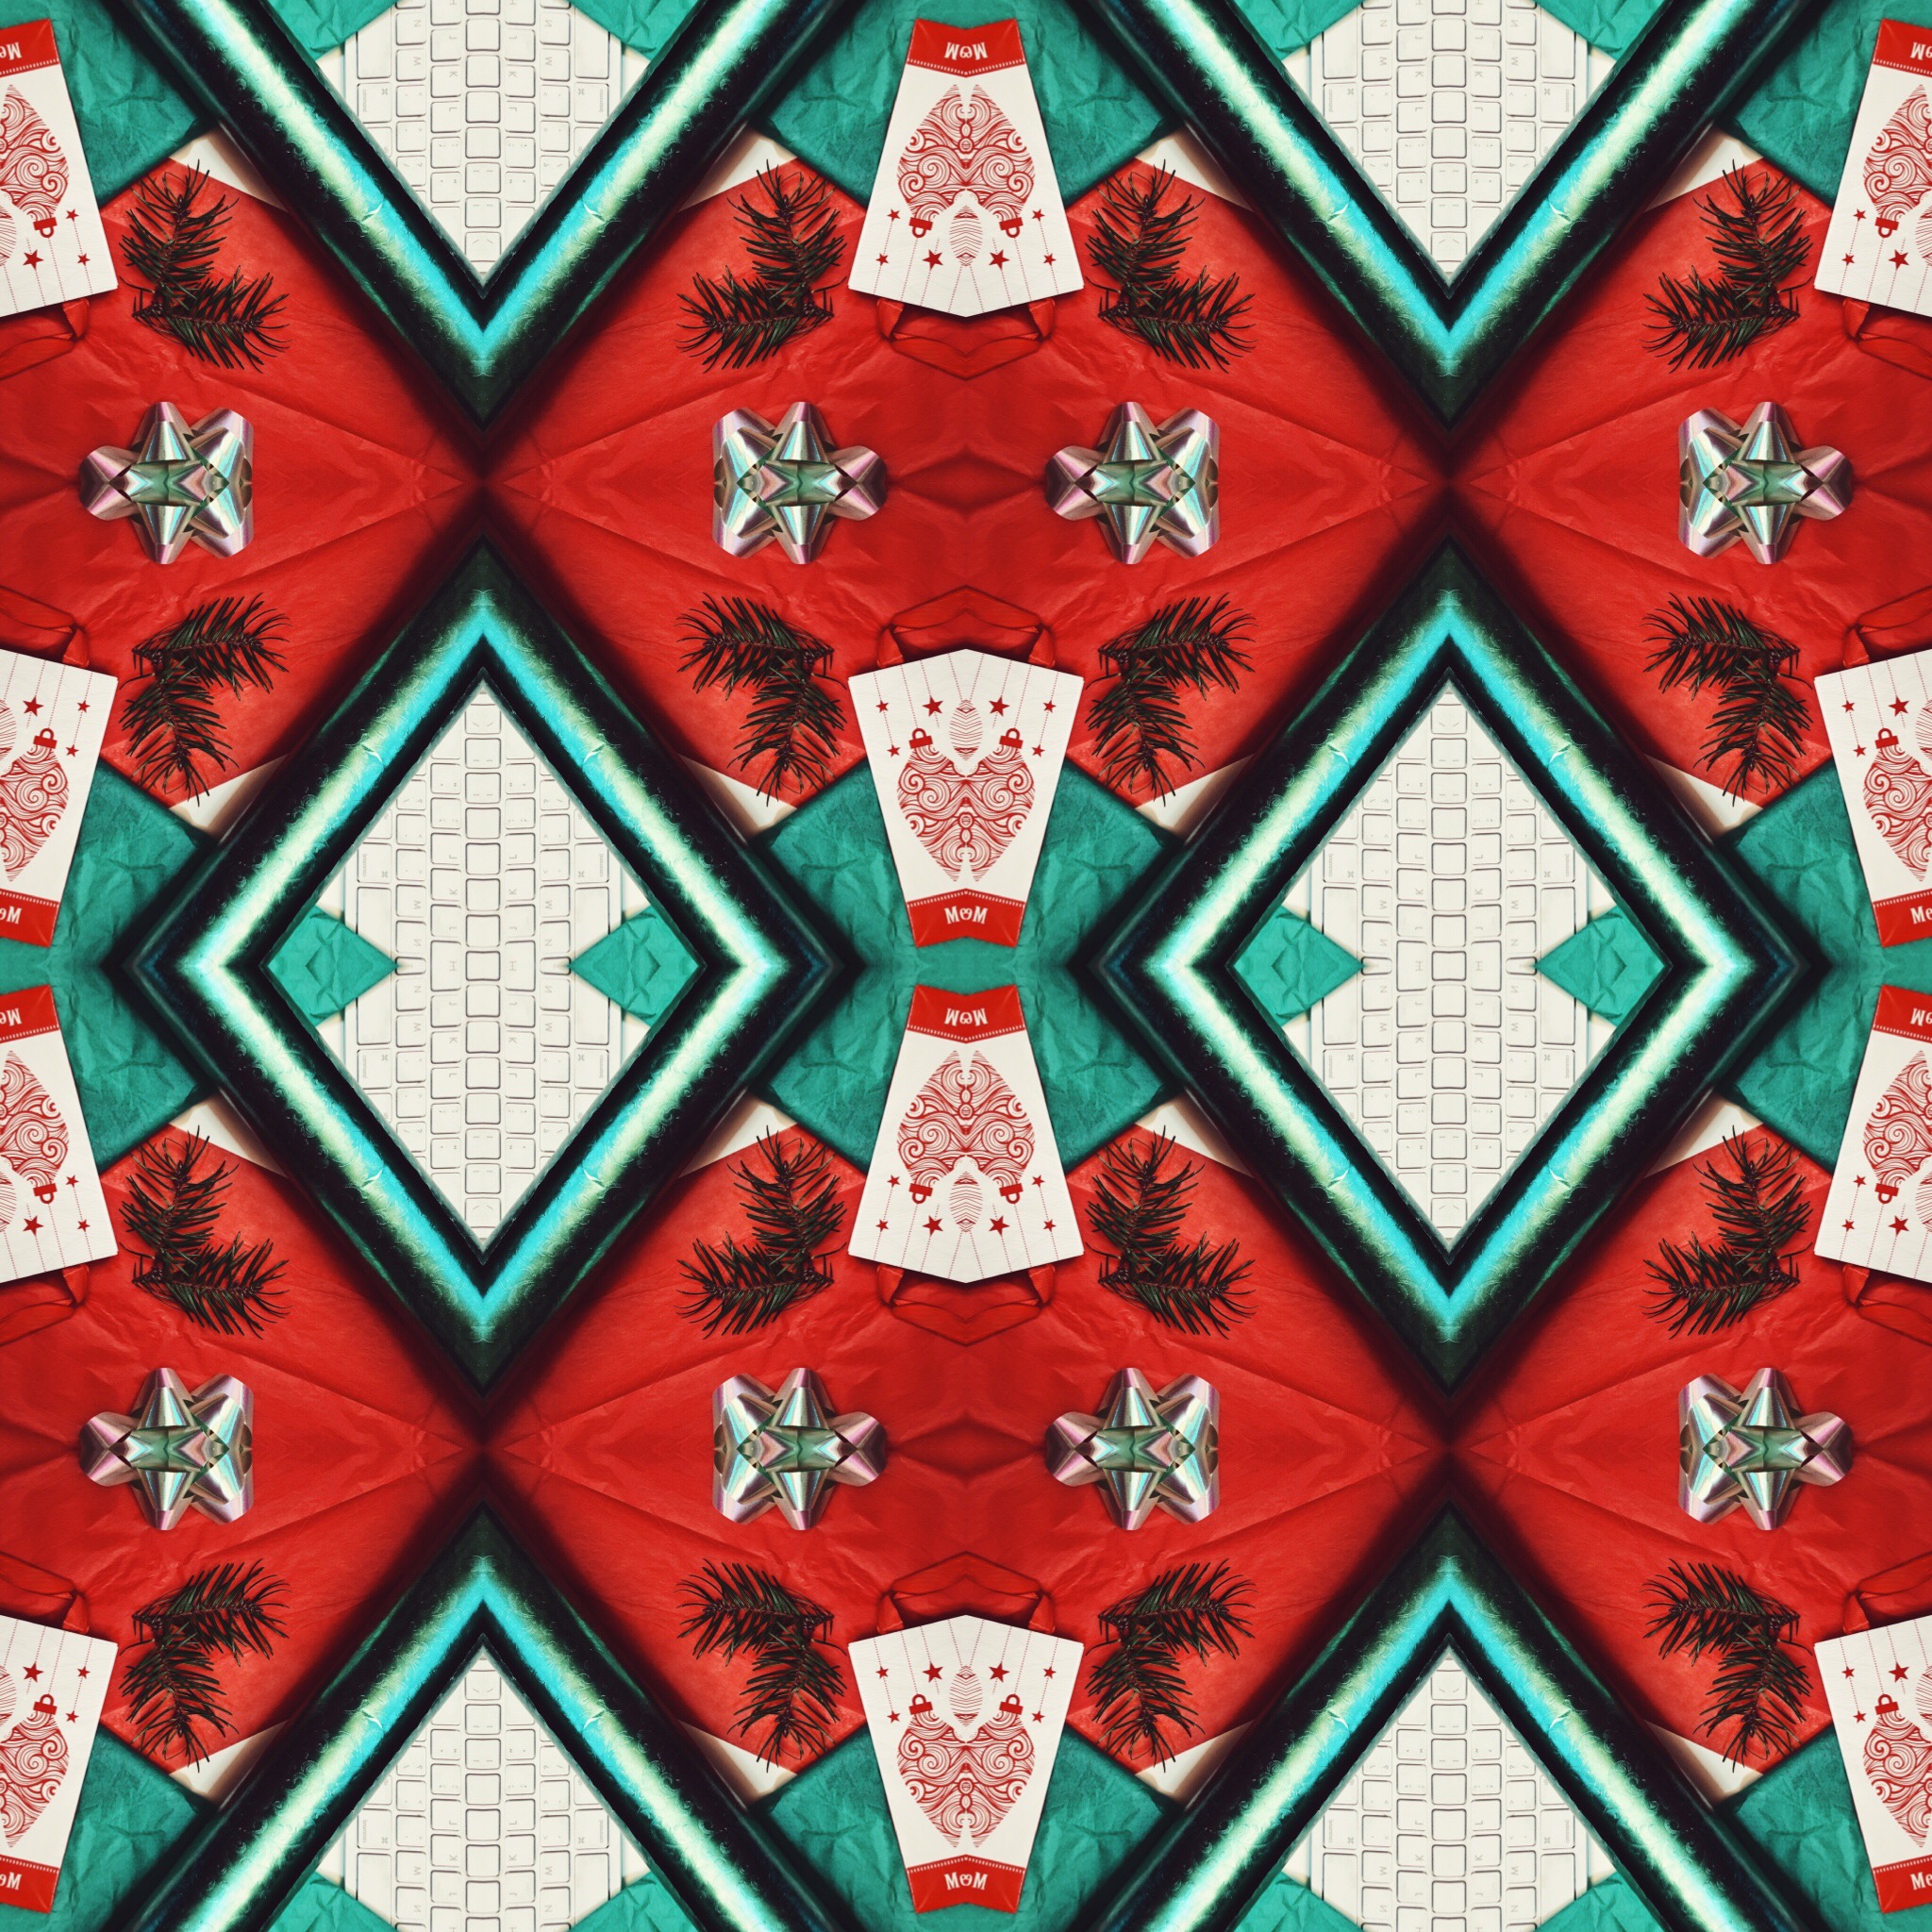 lcm-liveclothesminded-paperless post-christmas post-ecard-festive-holiday-kaleidoscope